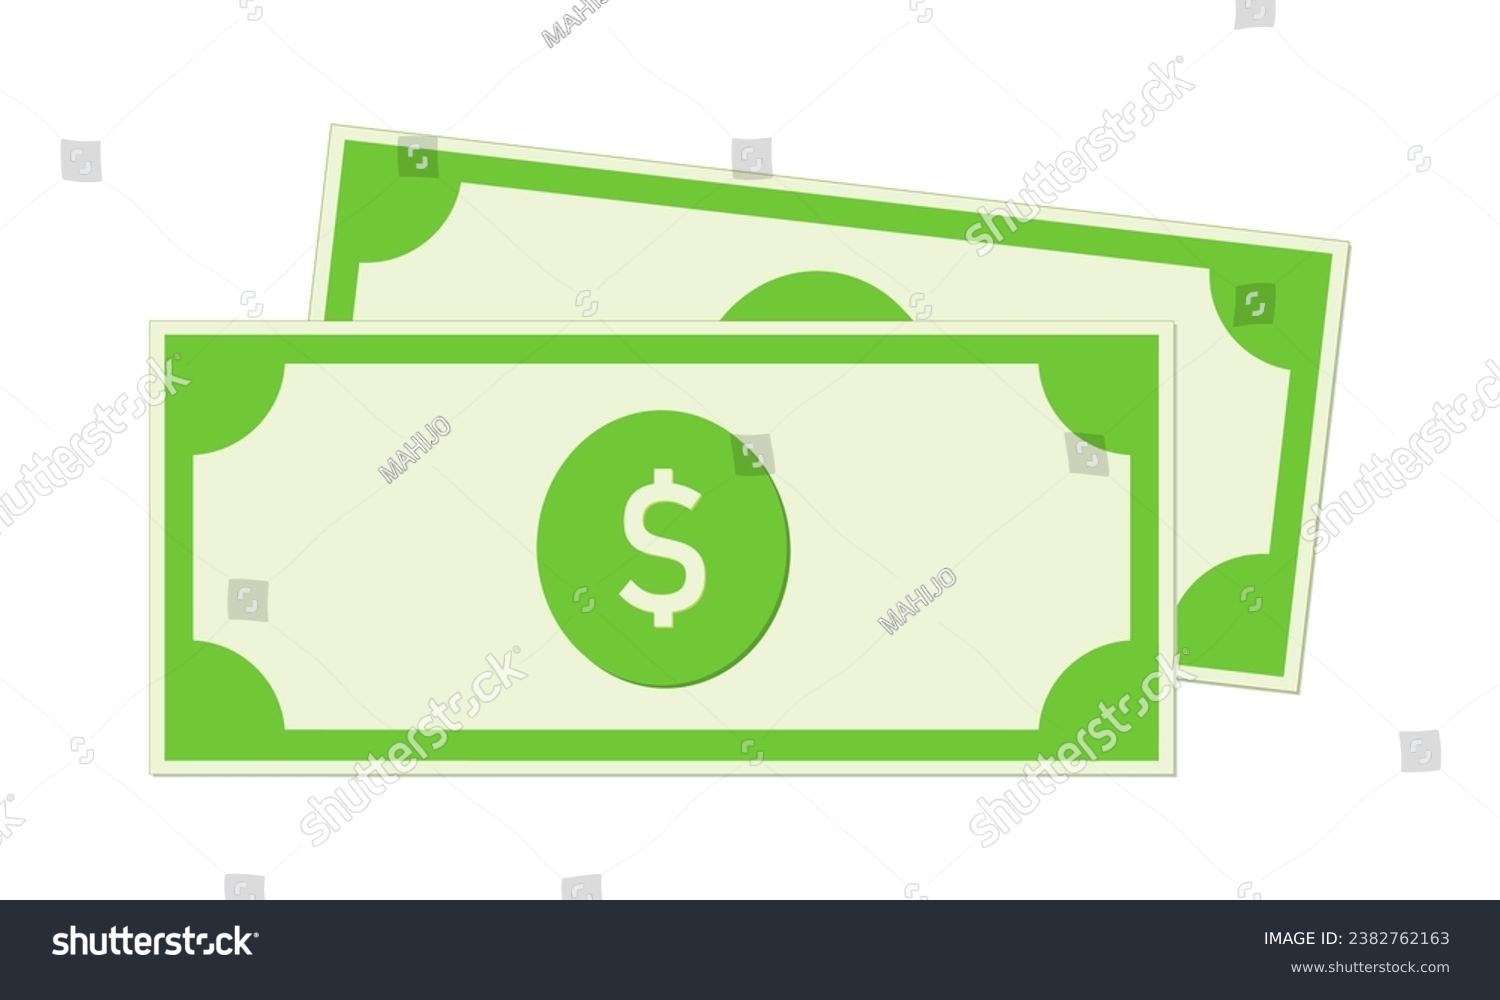 SVG of Two dollar bills isolated on white background svg